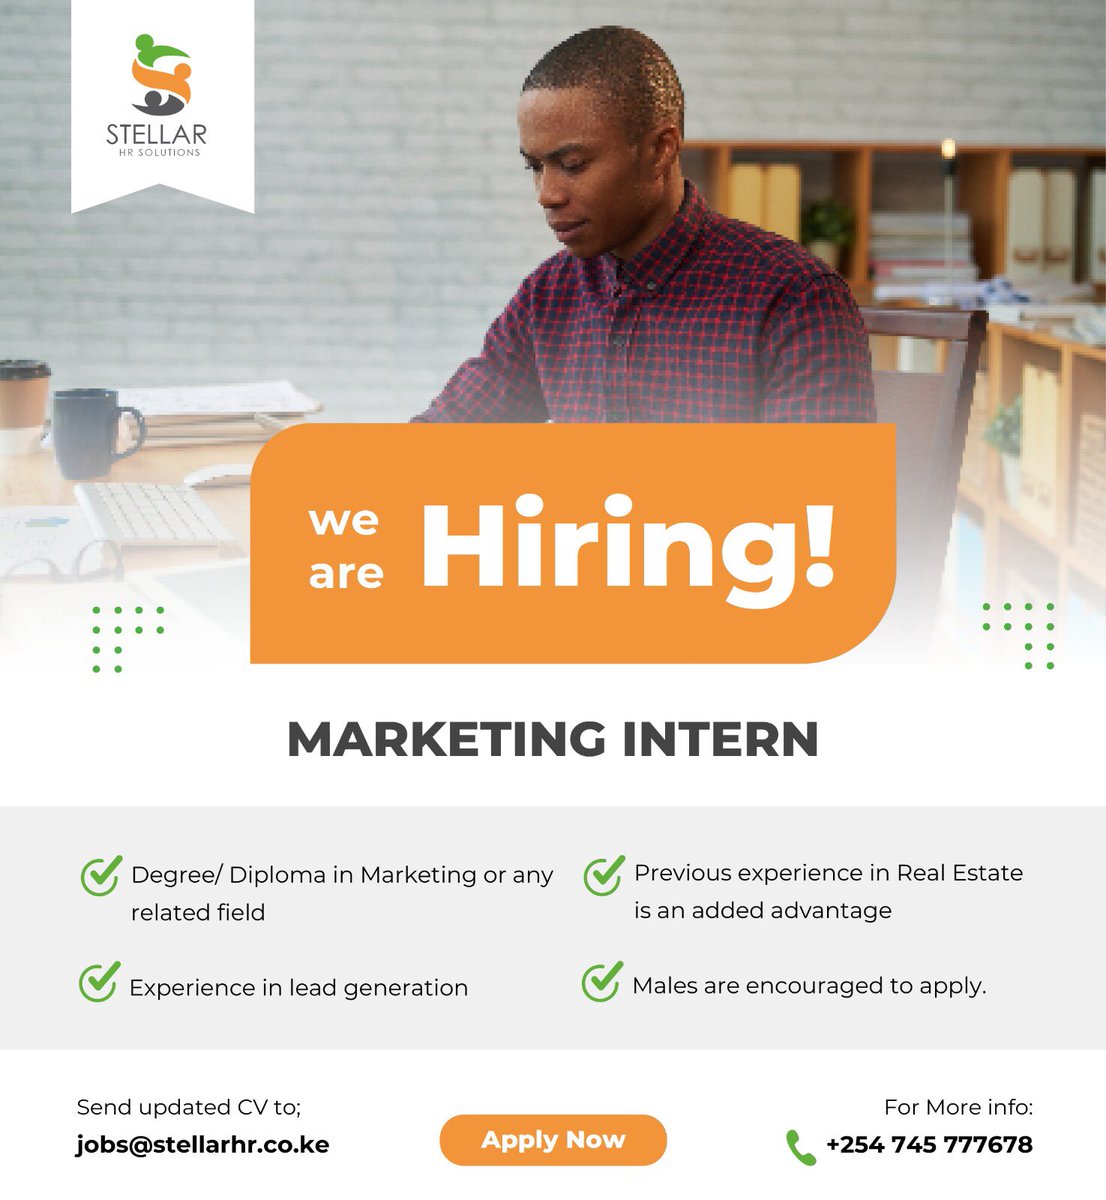 #wearehiring

Our client in the real estate industry is seeking to acquire a Marketing intern. 

You can apply via ;

Jobs@stellarhr.co.ke

#ikokazike #JobOpportunity